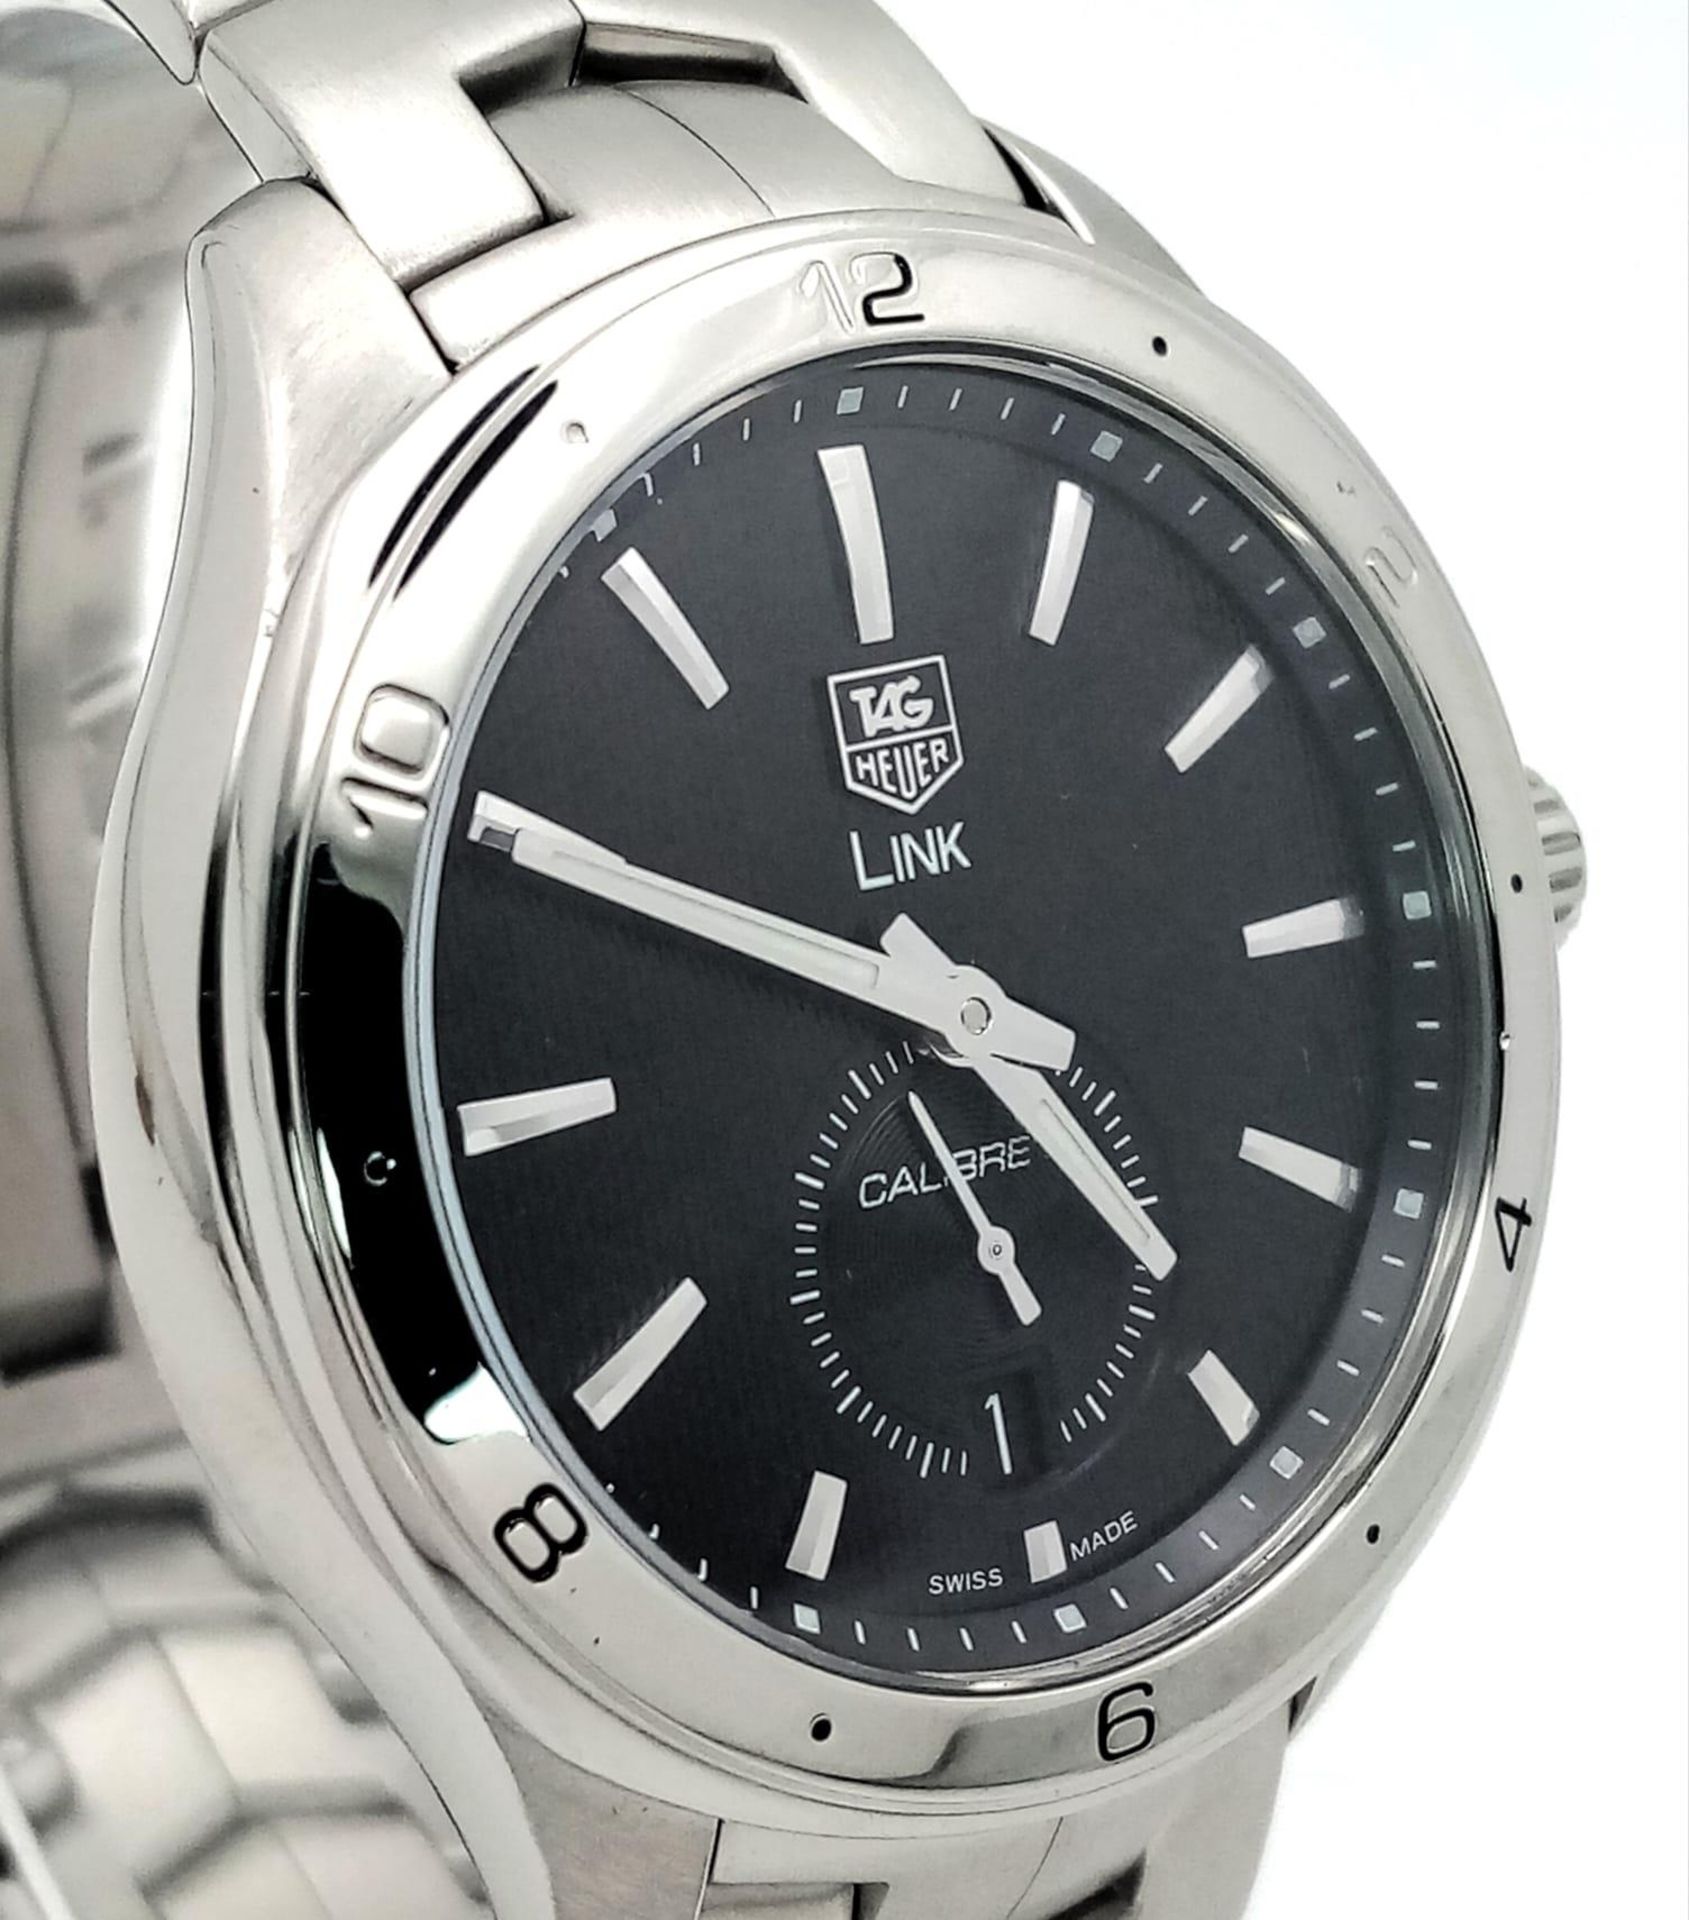 A Tag Heuer Link Calibre 6 Automatic Watch. Stainless steel bracelet and case - 41mm. Black dial - Image 4 of 9